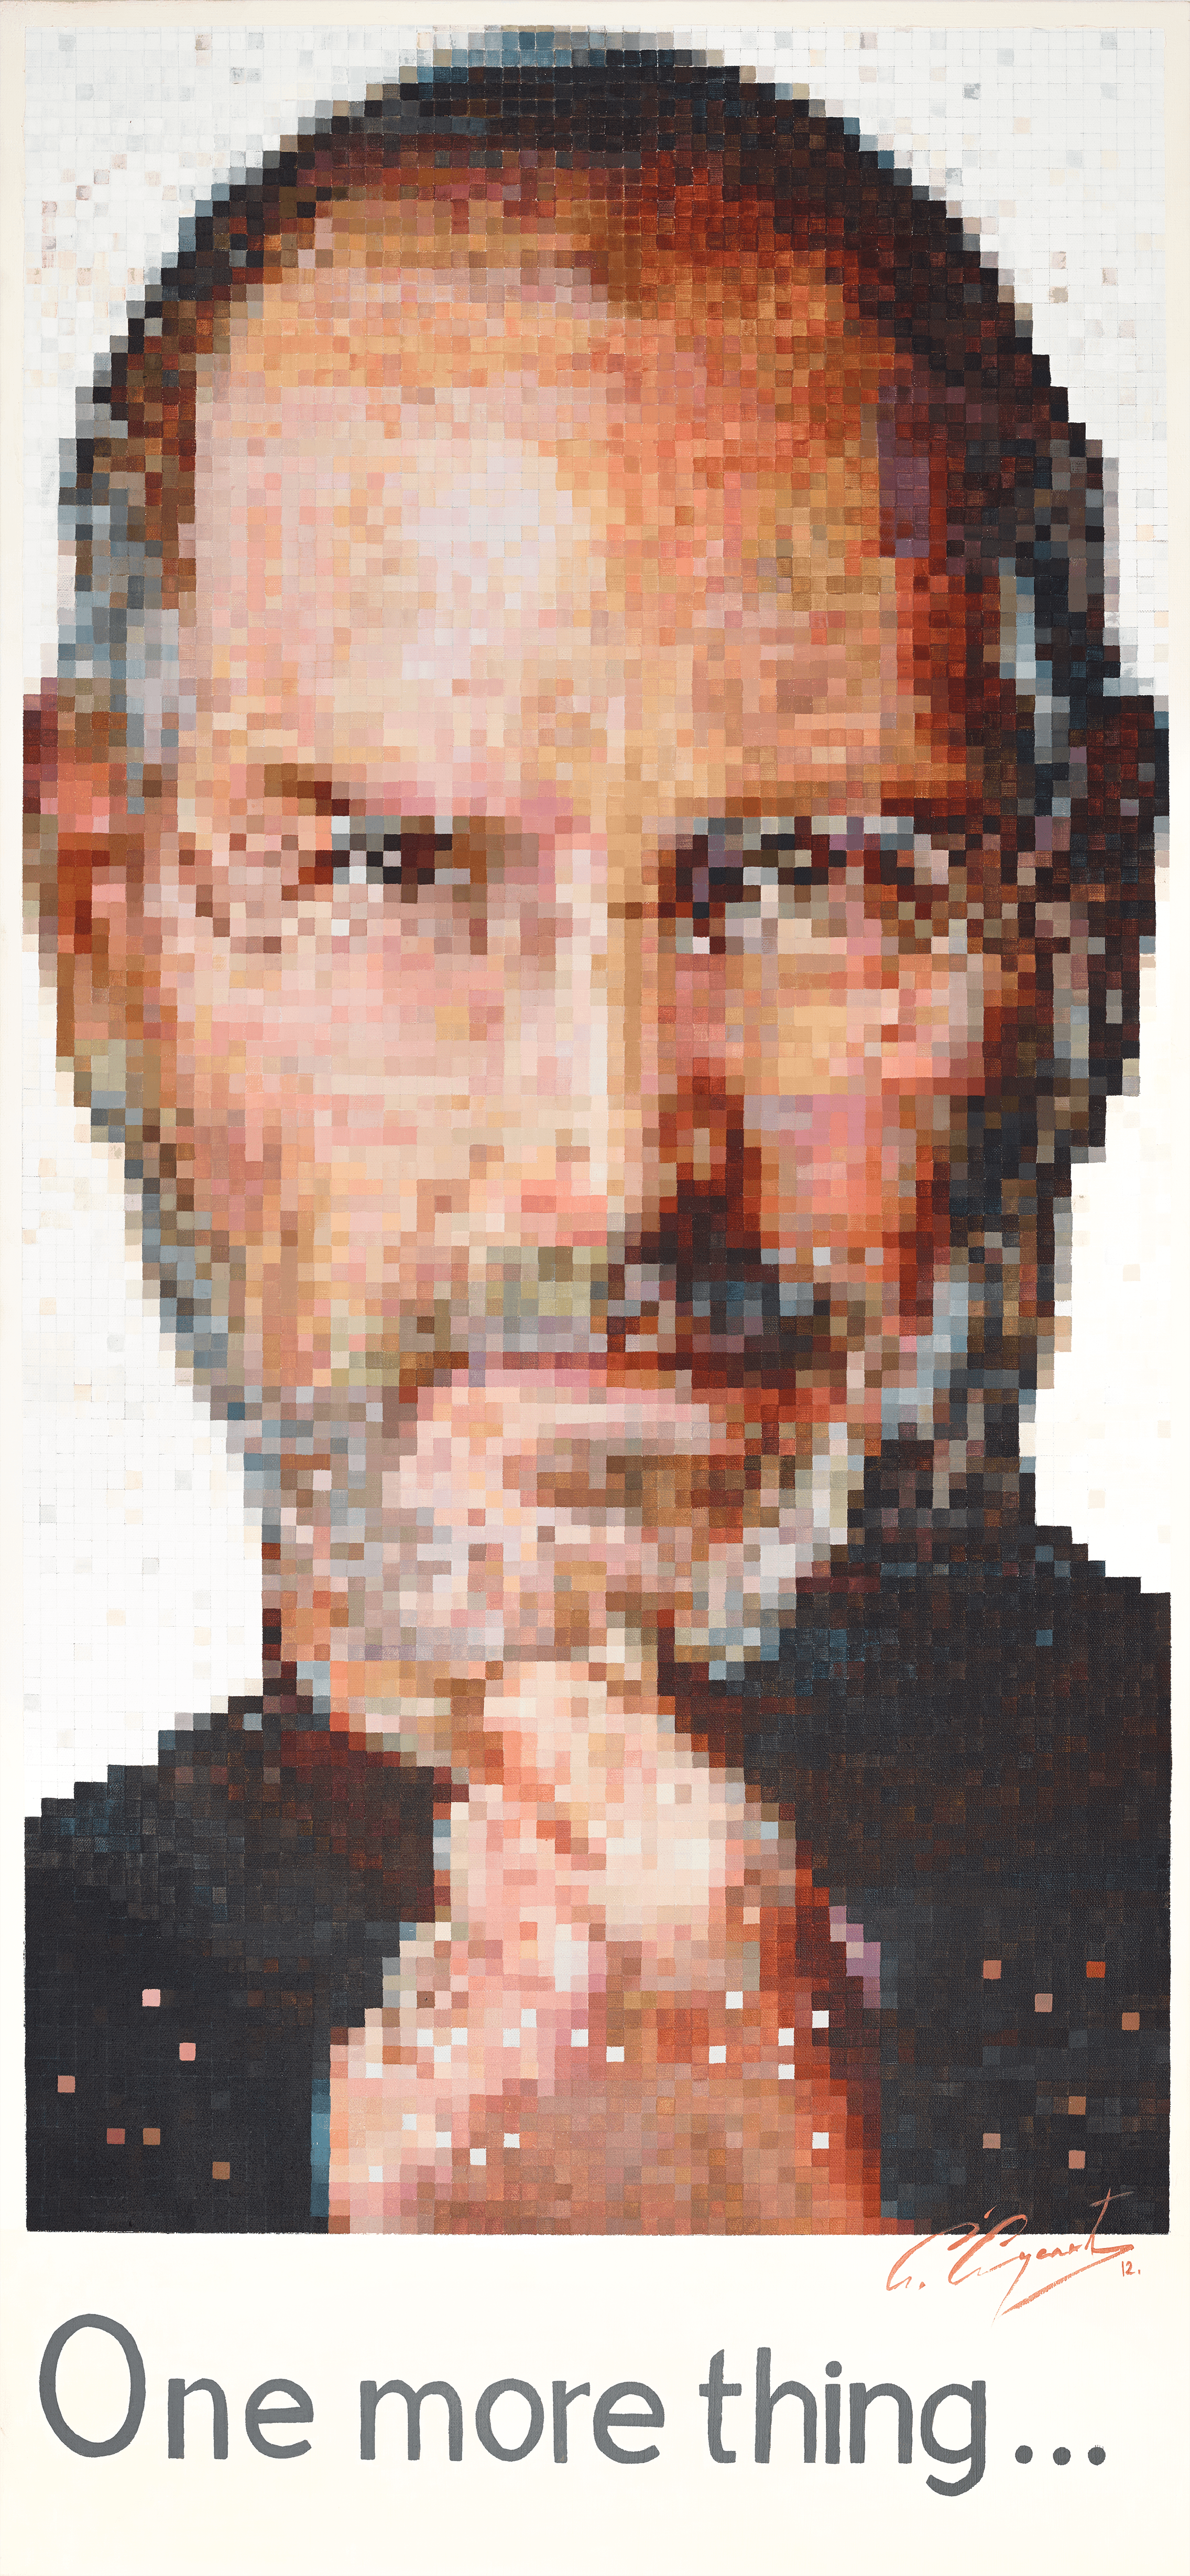 Steve Jobs "To Be Continued"